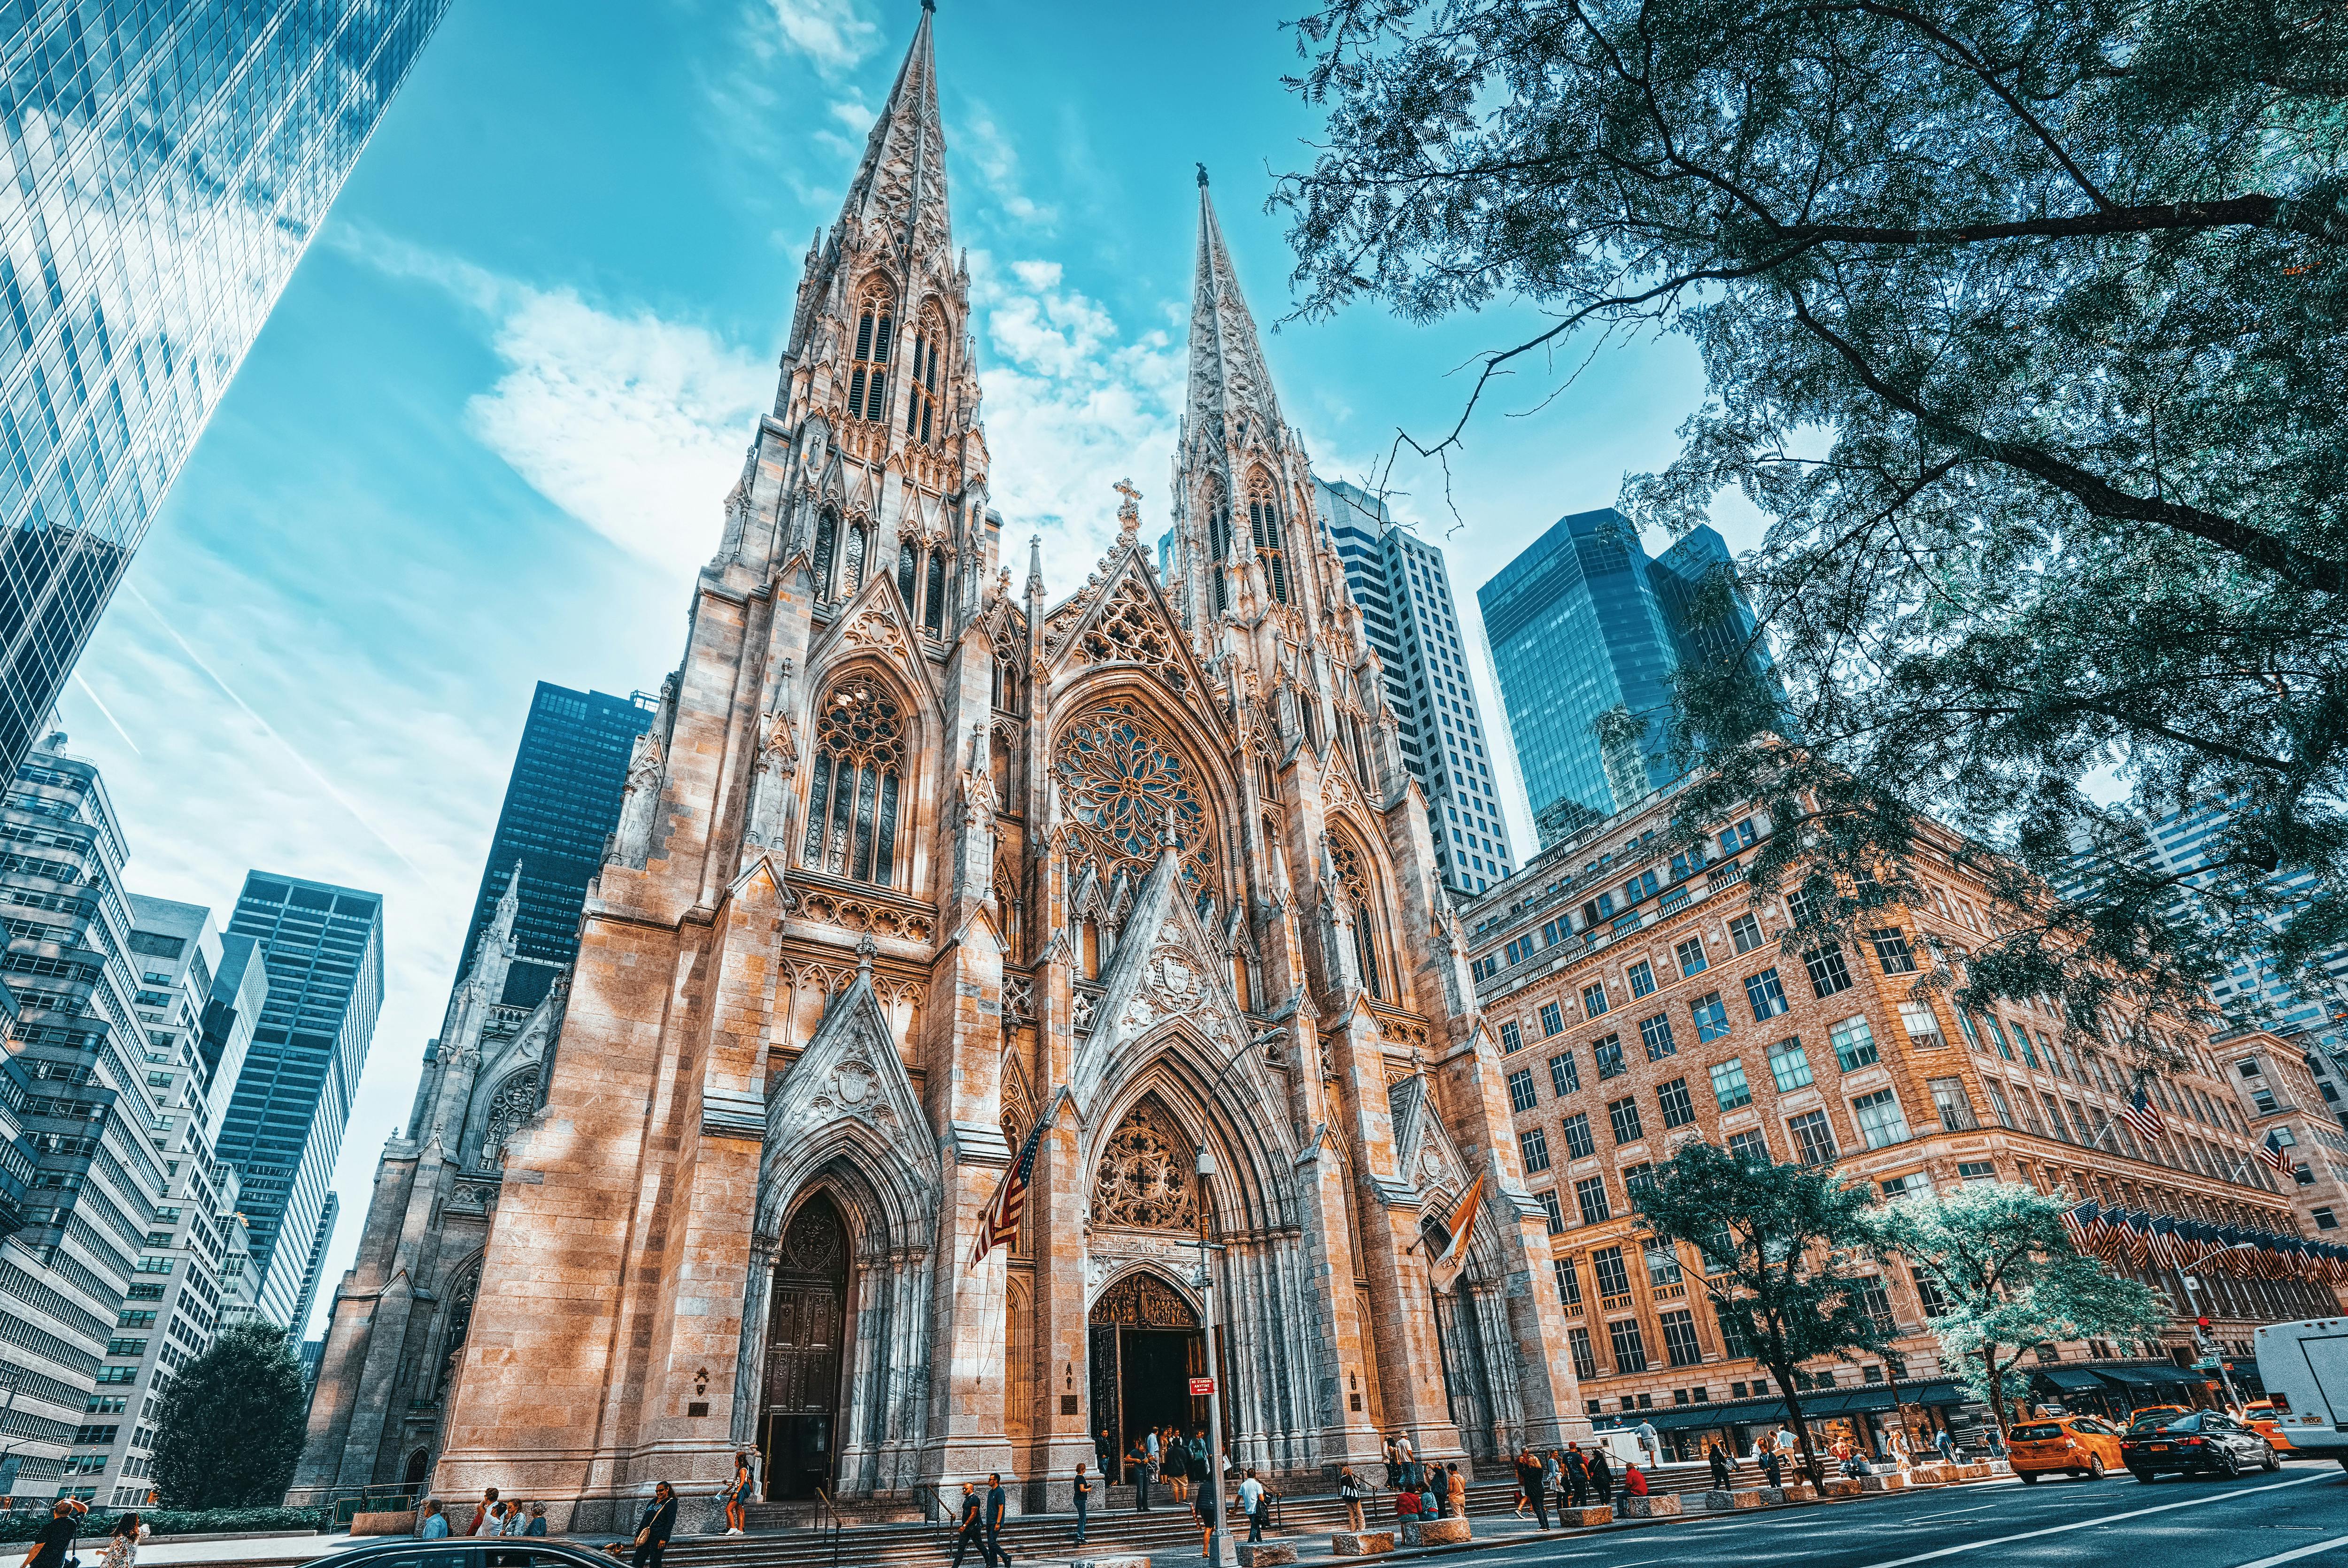 Statue of Liberty and St Patrick's Cathedral admission tickets